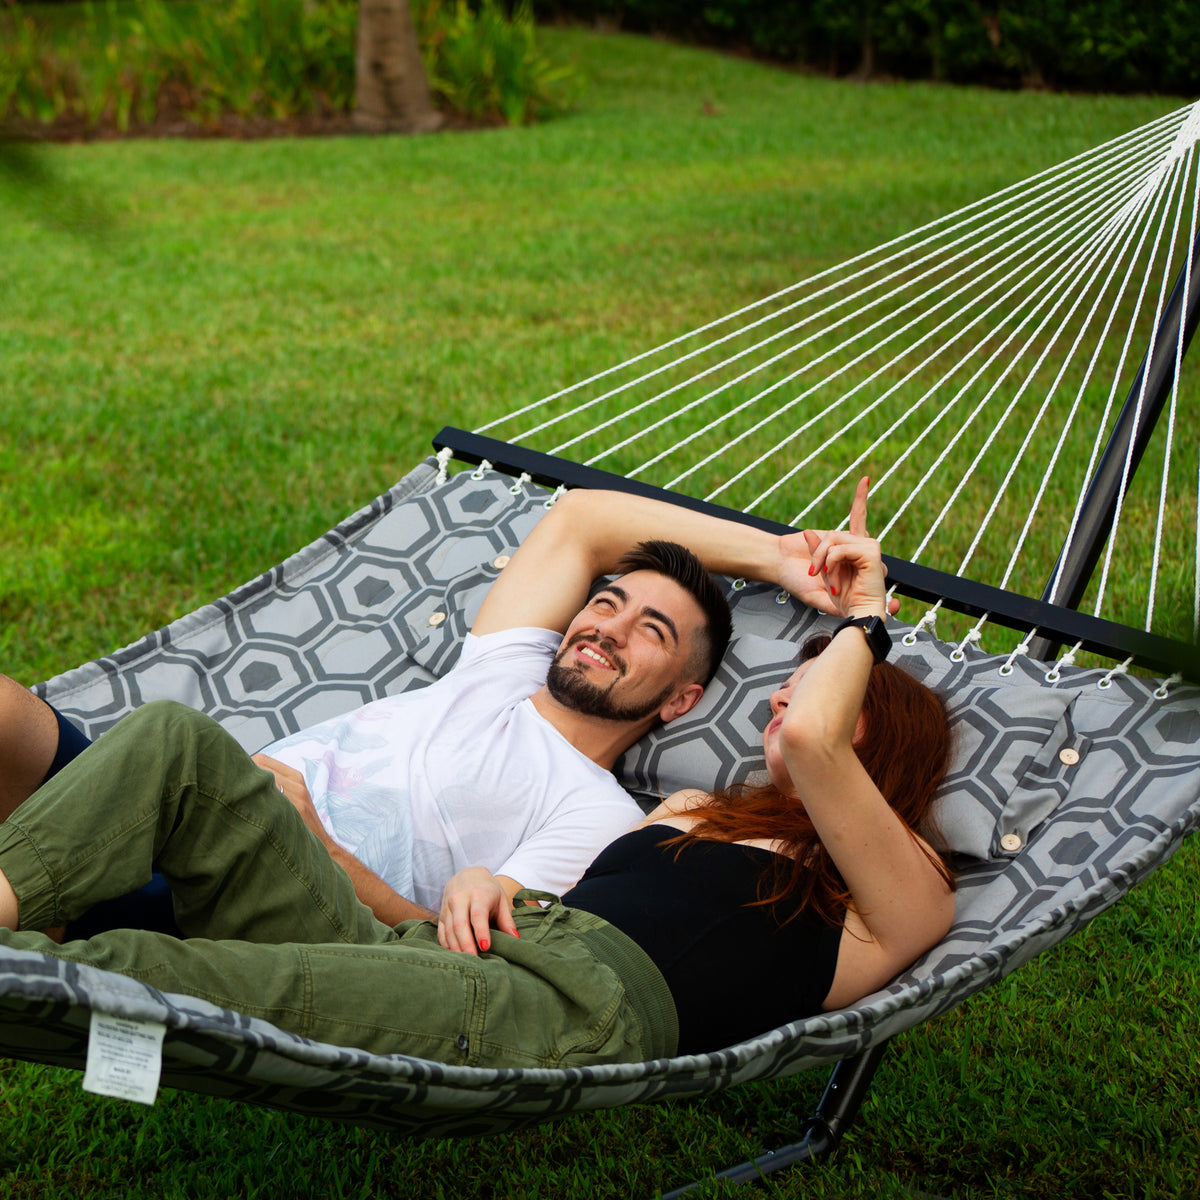 Man and woman looking up into the sky while relaxing outside in the grass on a Close up of the fabric and pattern for the Bliss Hammocks 55-inch Wide 2-Person Reversible Quilted Hammock with spreader bars and a pillow.